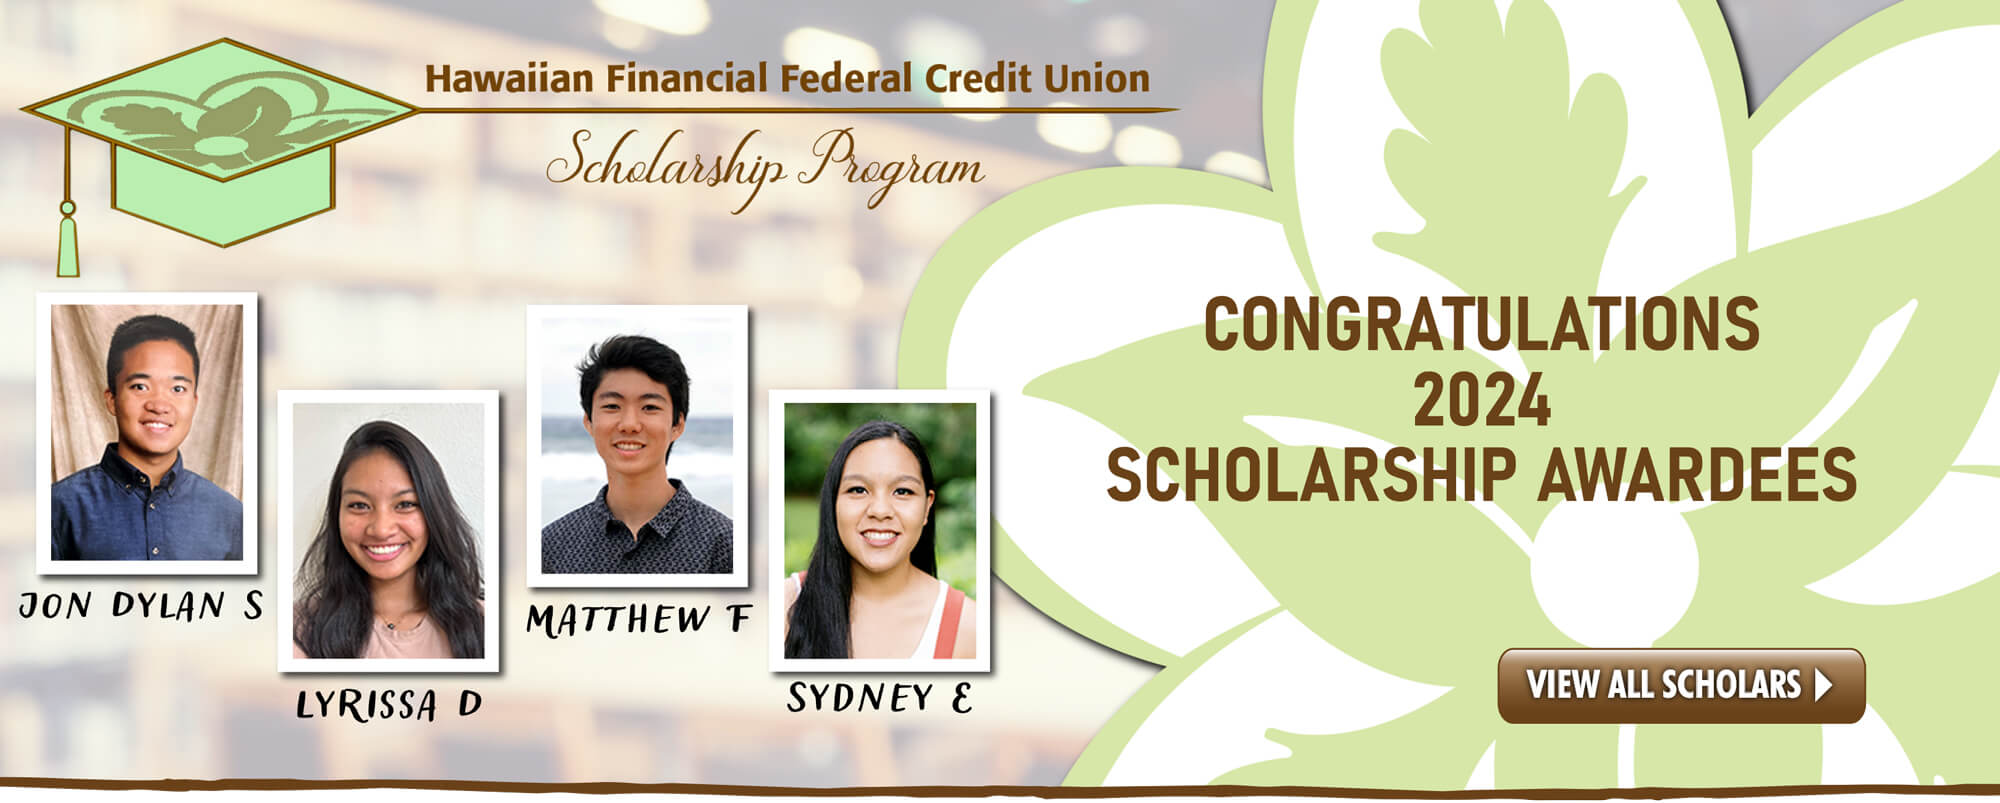 Congratulations to our 2024 Scholarship Awardees!  Click to view all of this year's scholars.